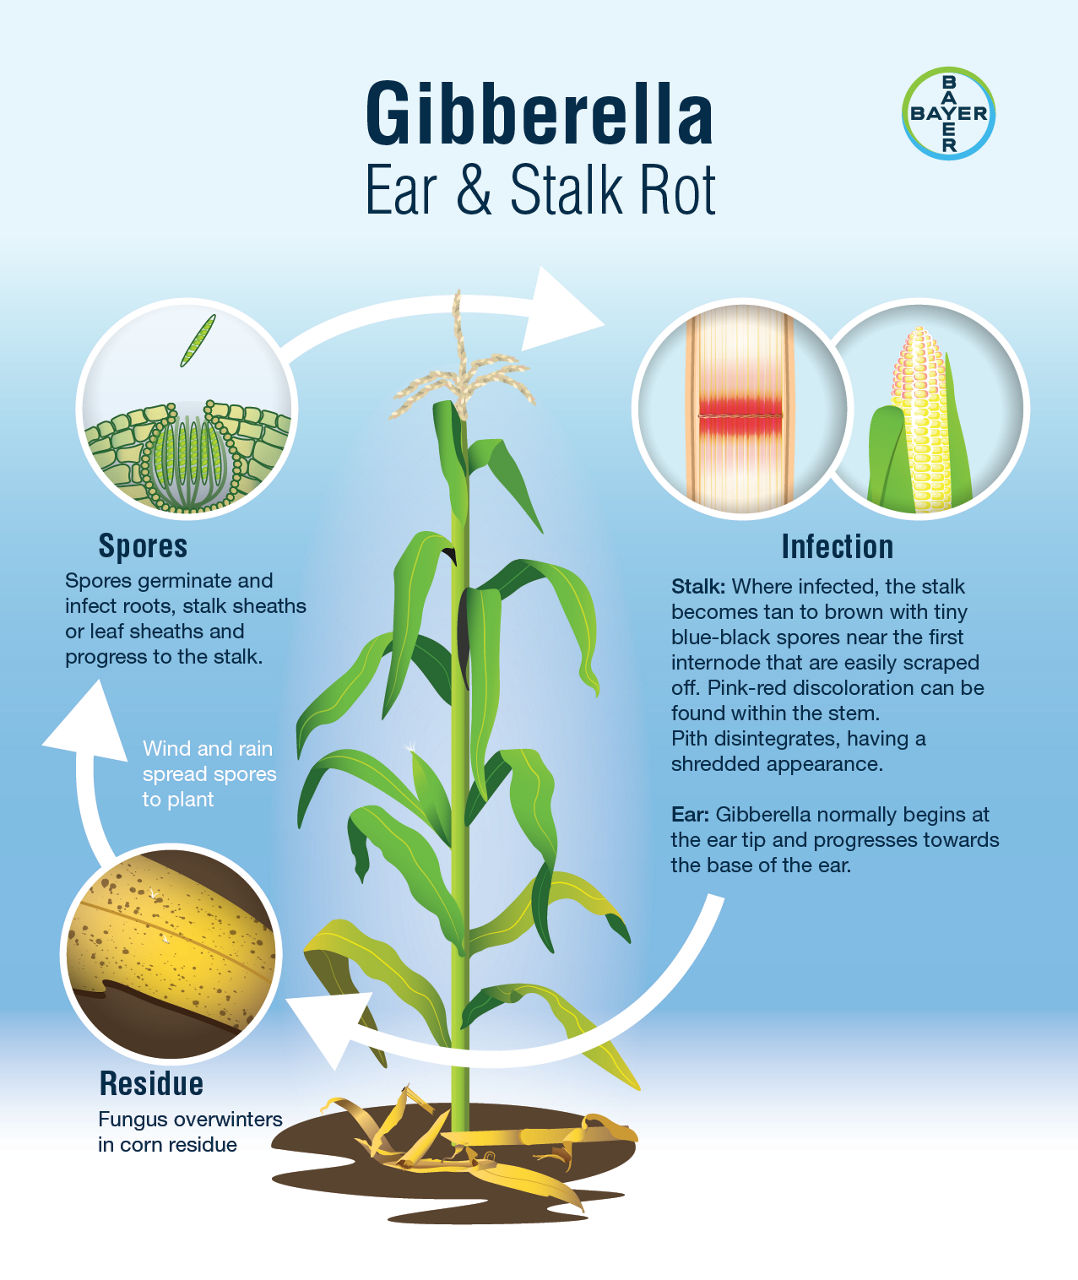 Gibberella Ear Rot and Stalk Rot Disease Cycle